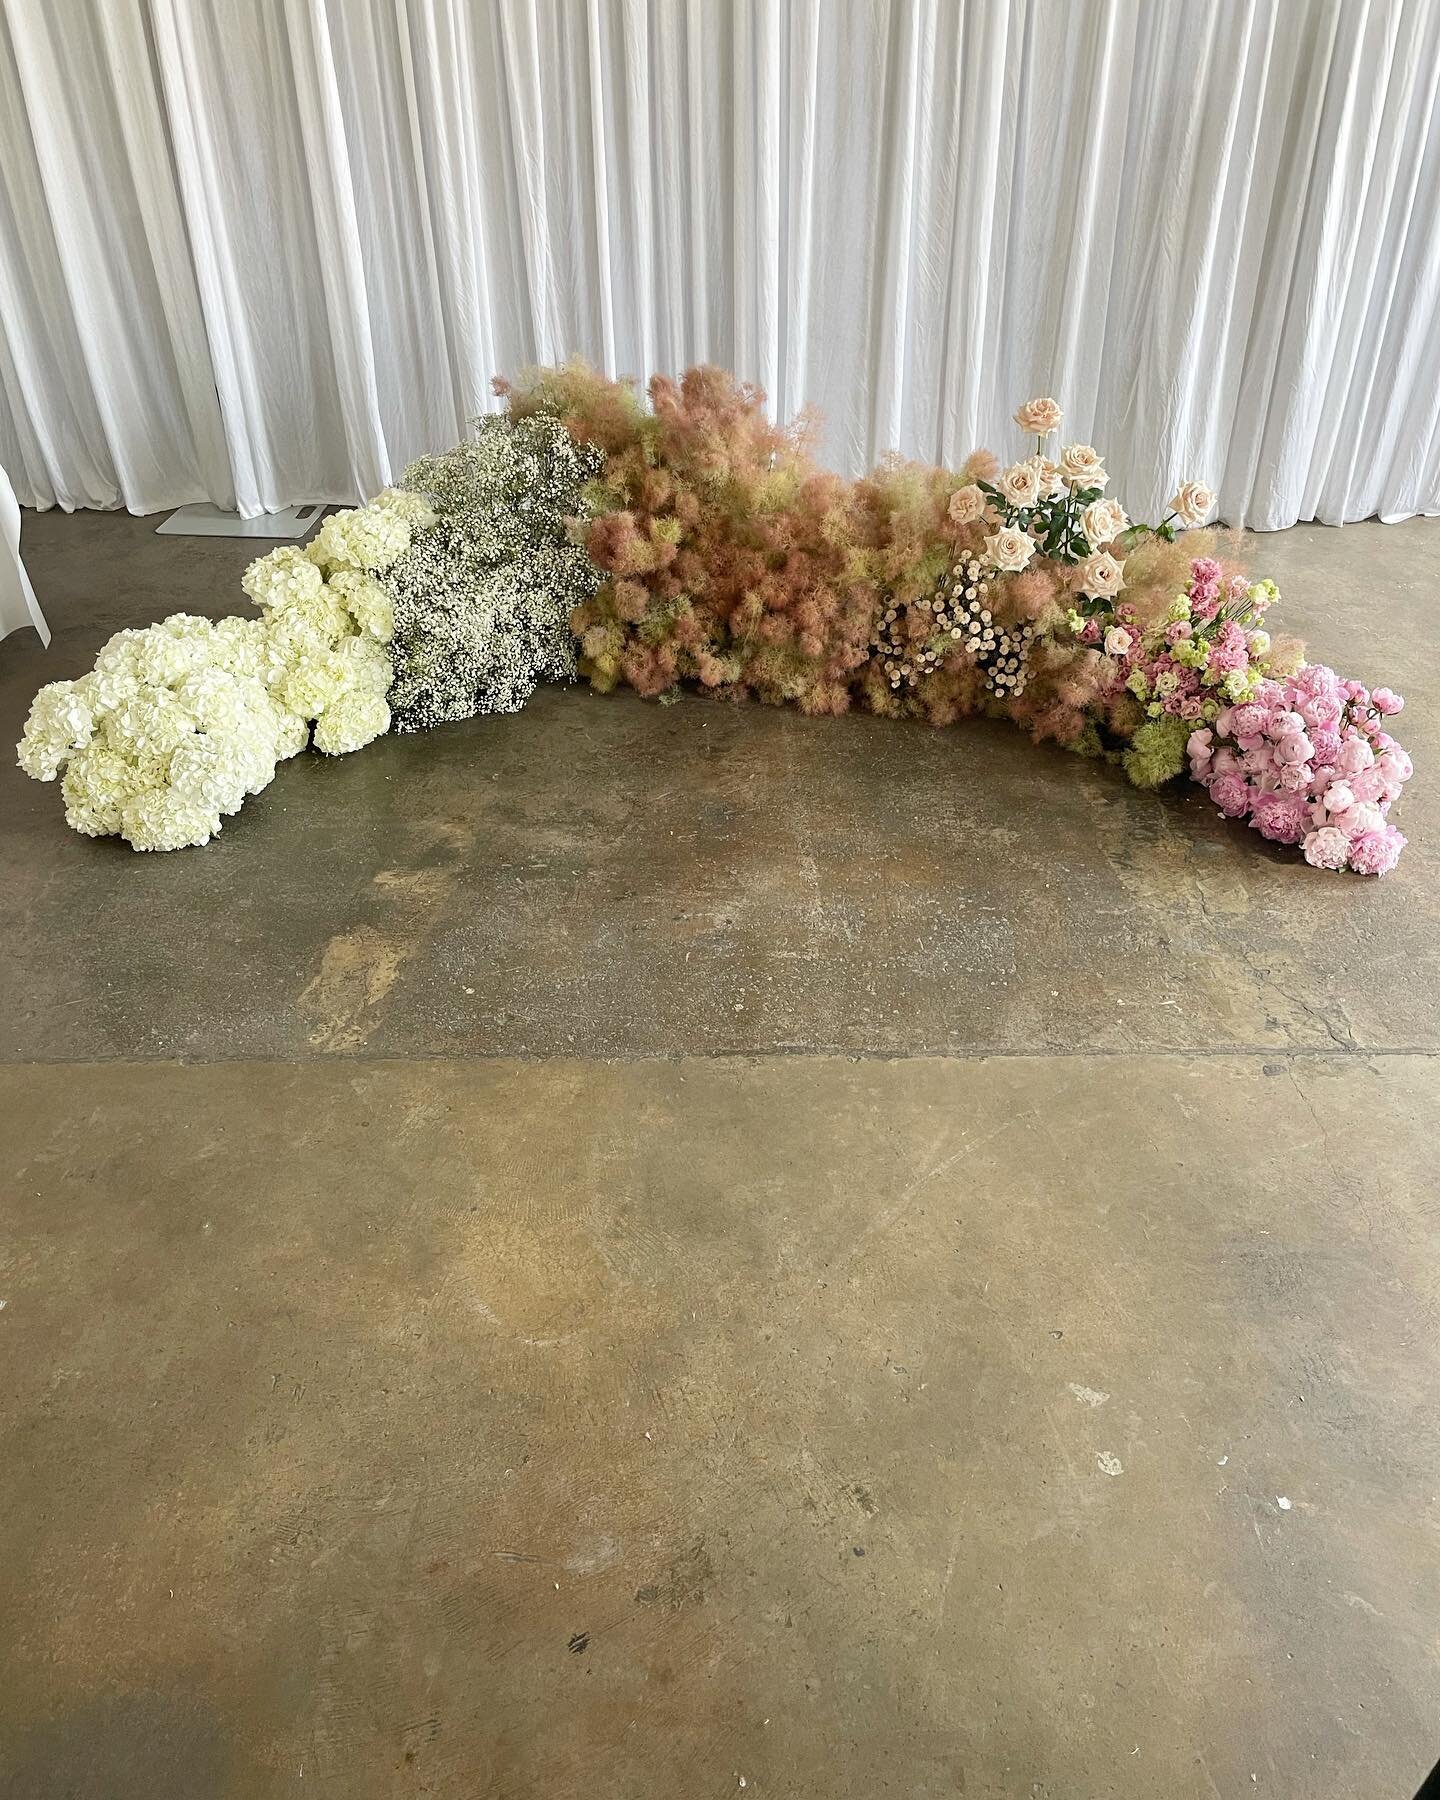 The lovely lovely Lauren &amp; Chris 💗 We created a freestanding floor installation for their ceremony @campandfurnace today. They were so laid back and chill, very happy for us to take the lead on selection and style and we LOVED it. We decided a g